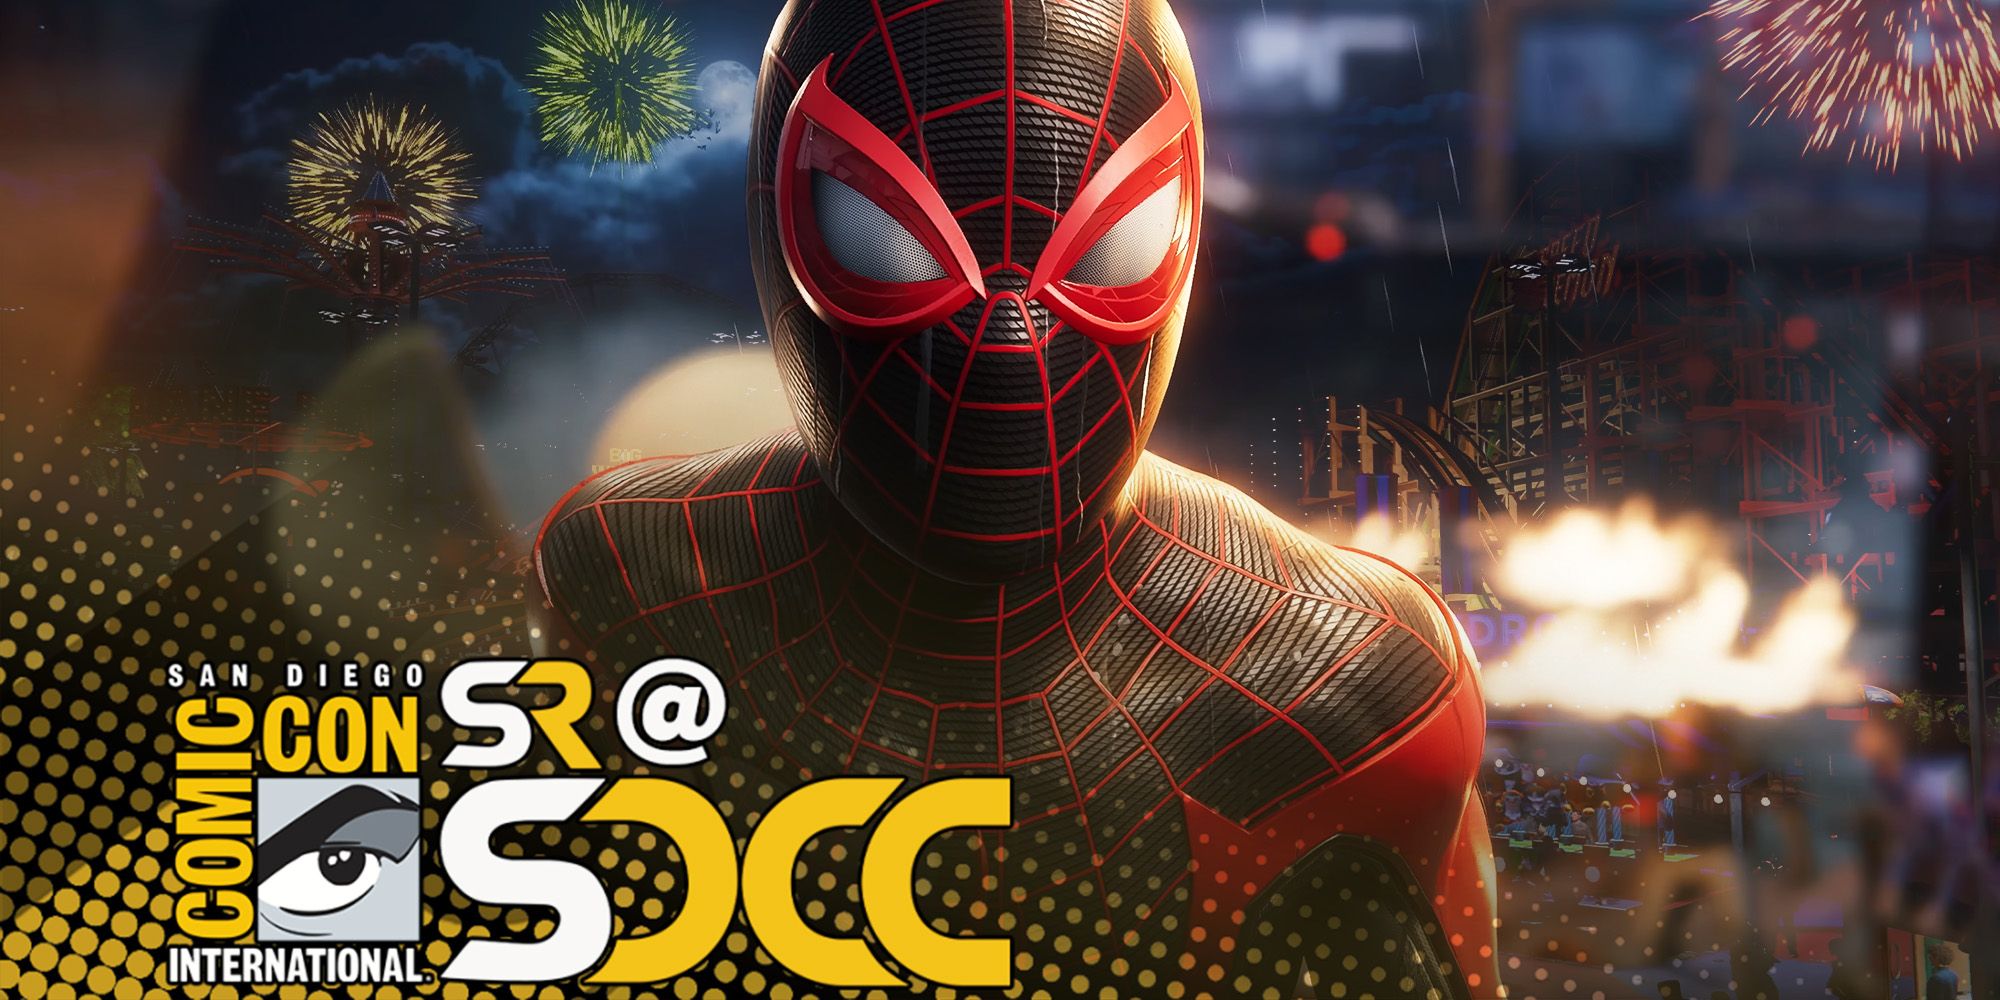 Marvel's Spider-Man 2 Gets Exclusive SDCC Poster - Comic Book